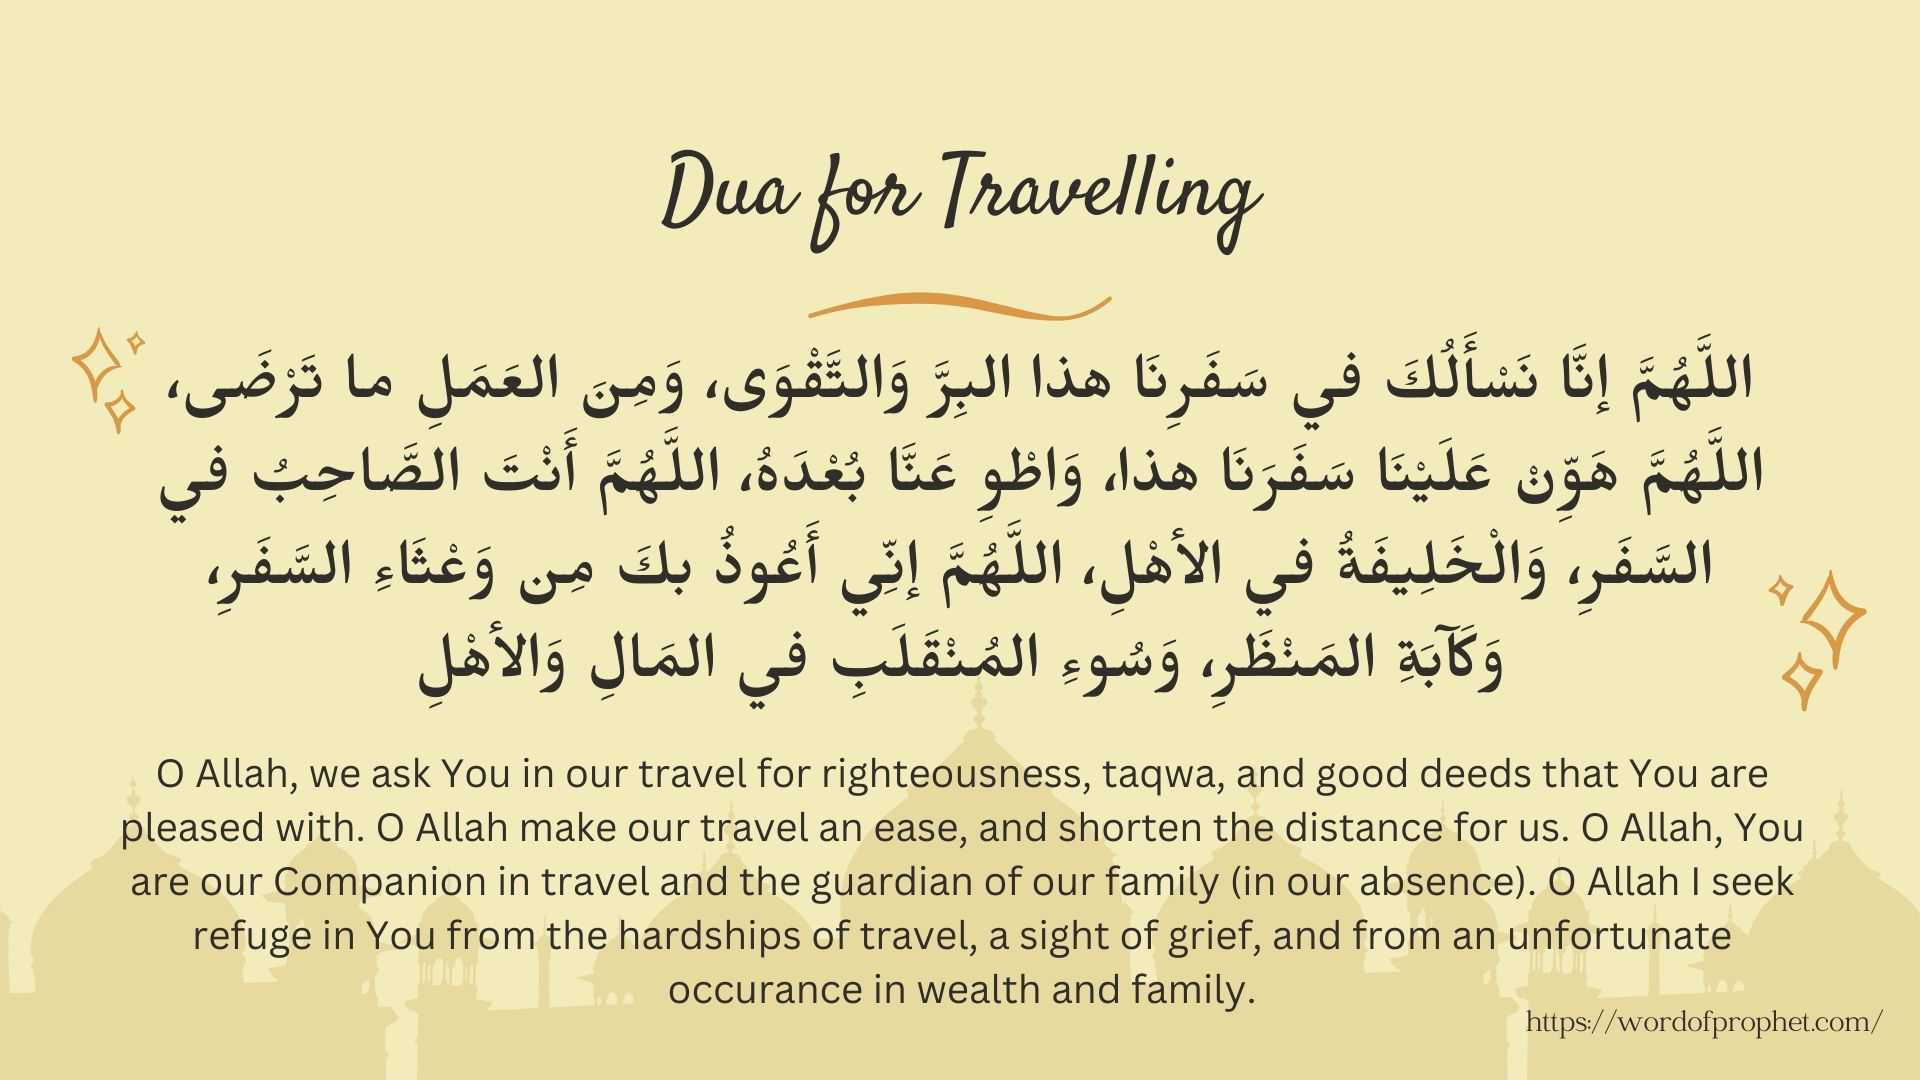 Dua for Travelling